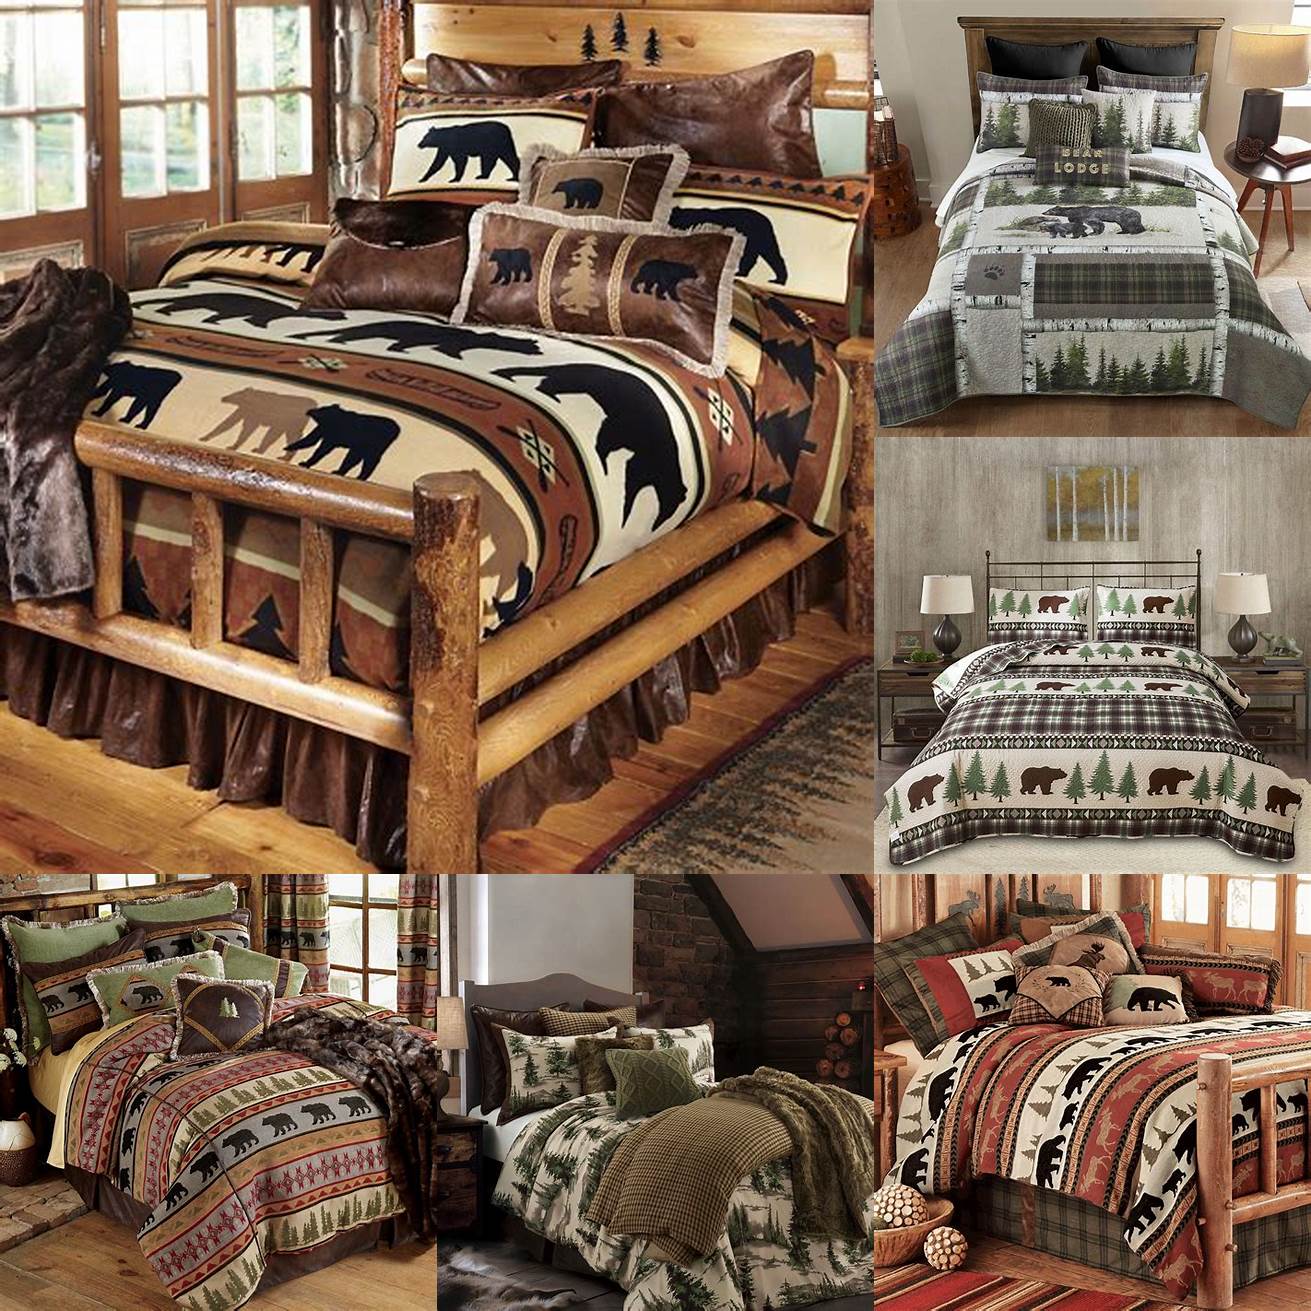 Bear-themed cabin bedding is perfect for nature lovers